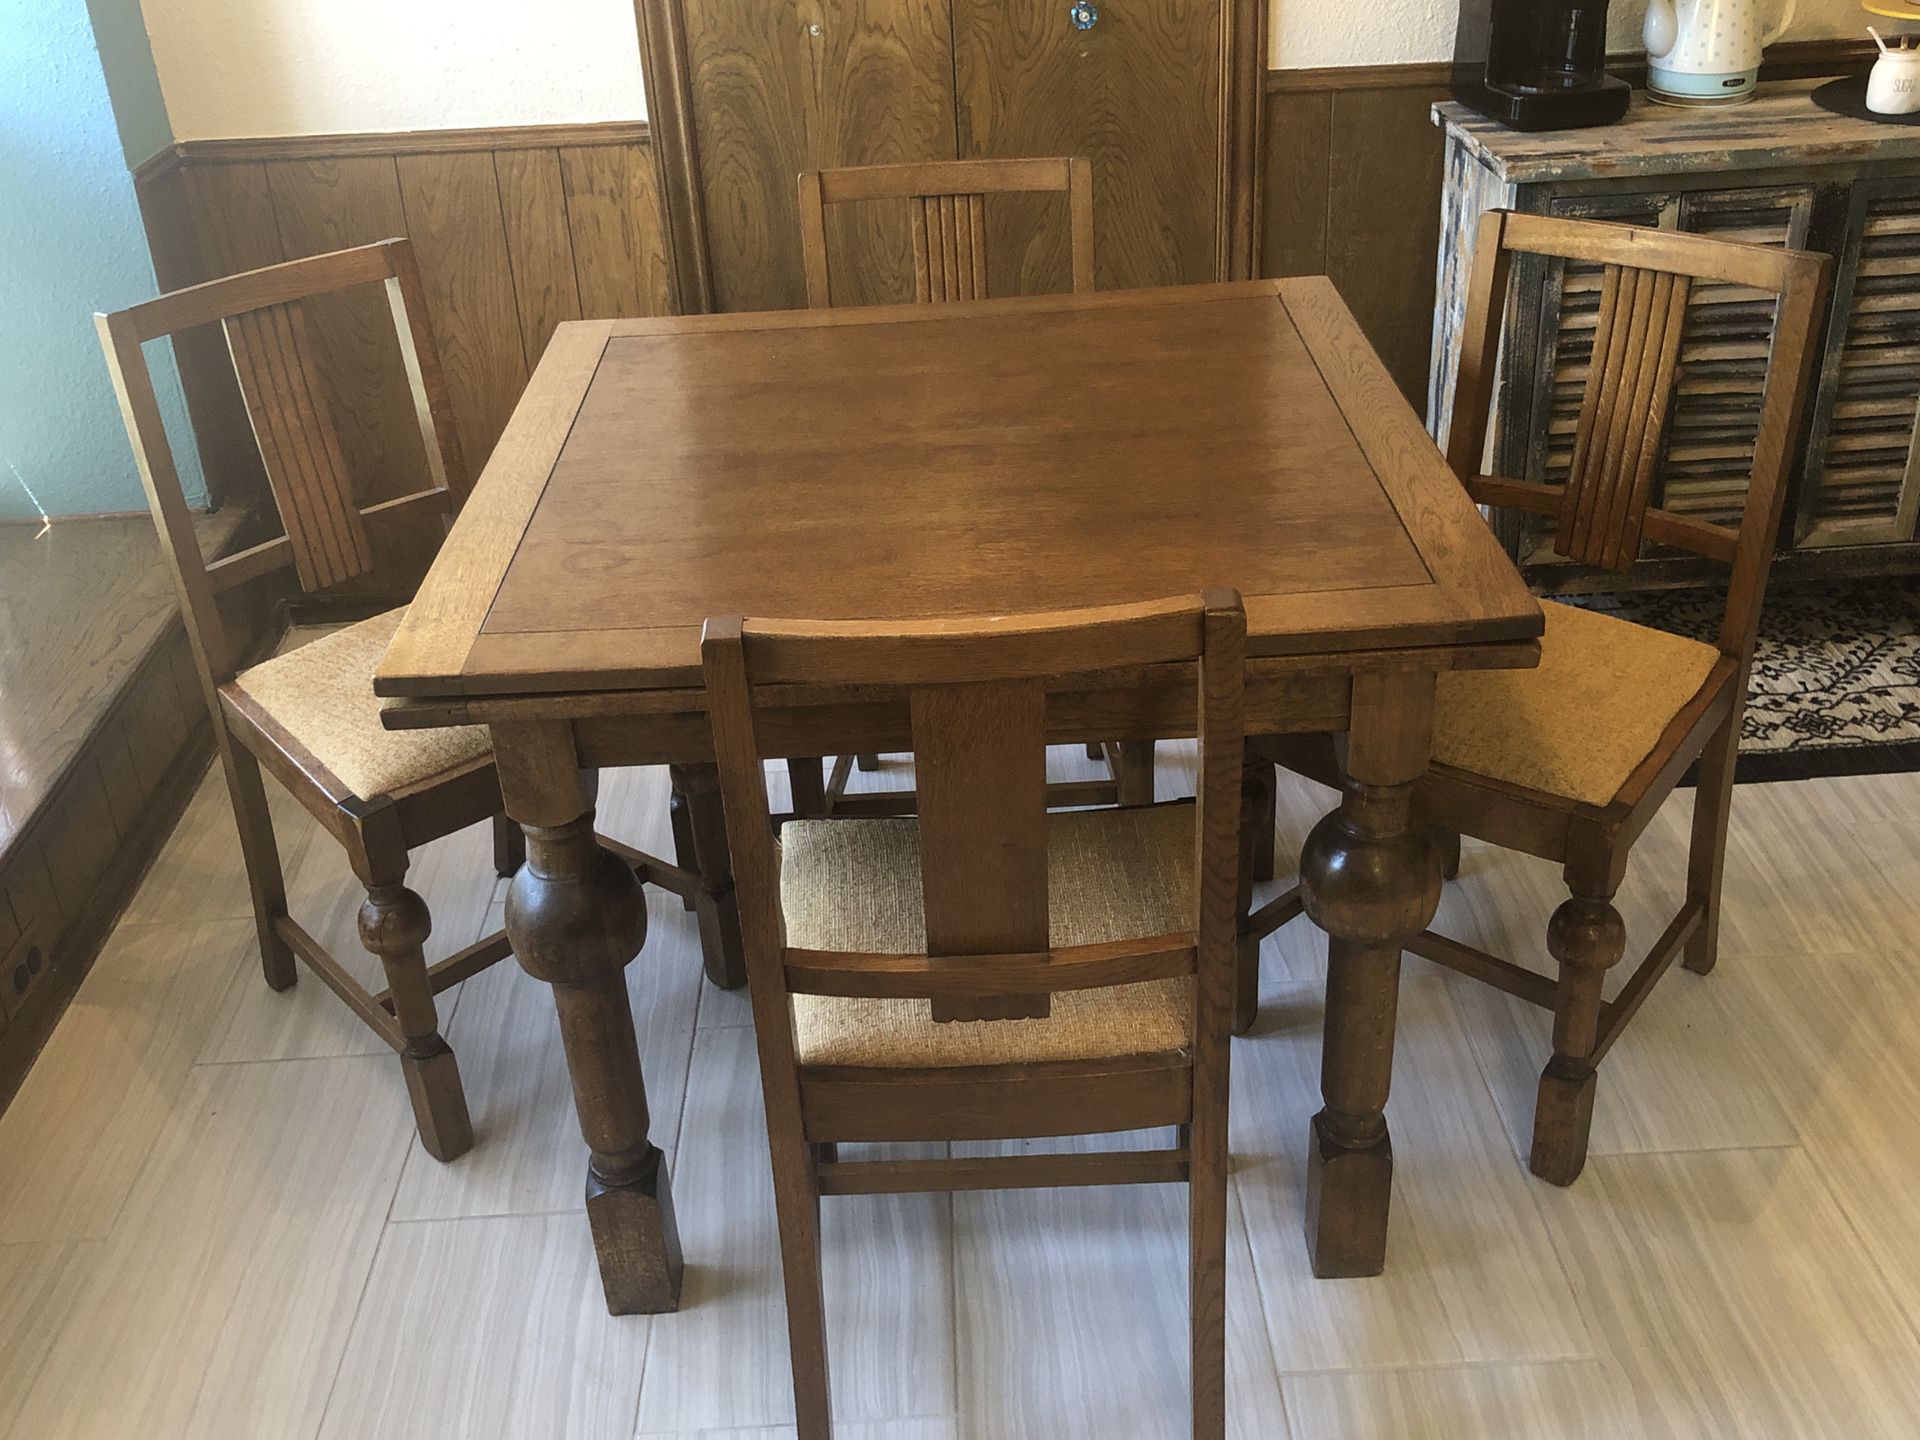 Kitchen Table with pull-out leaves